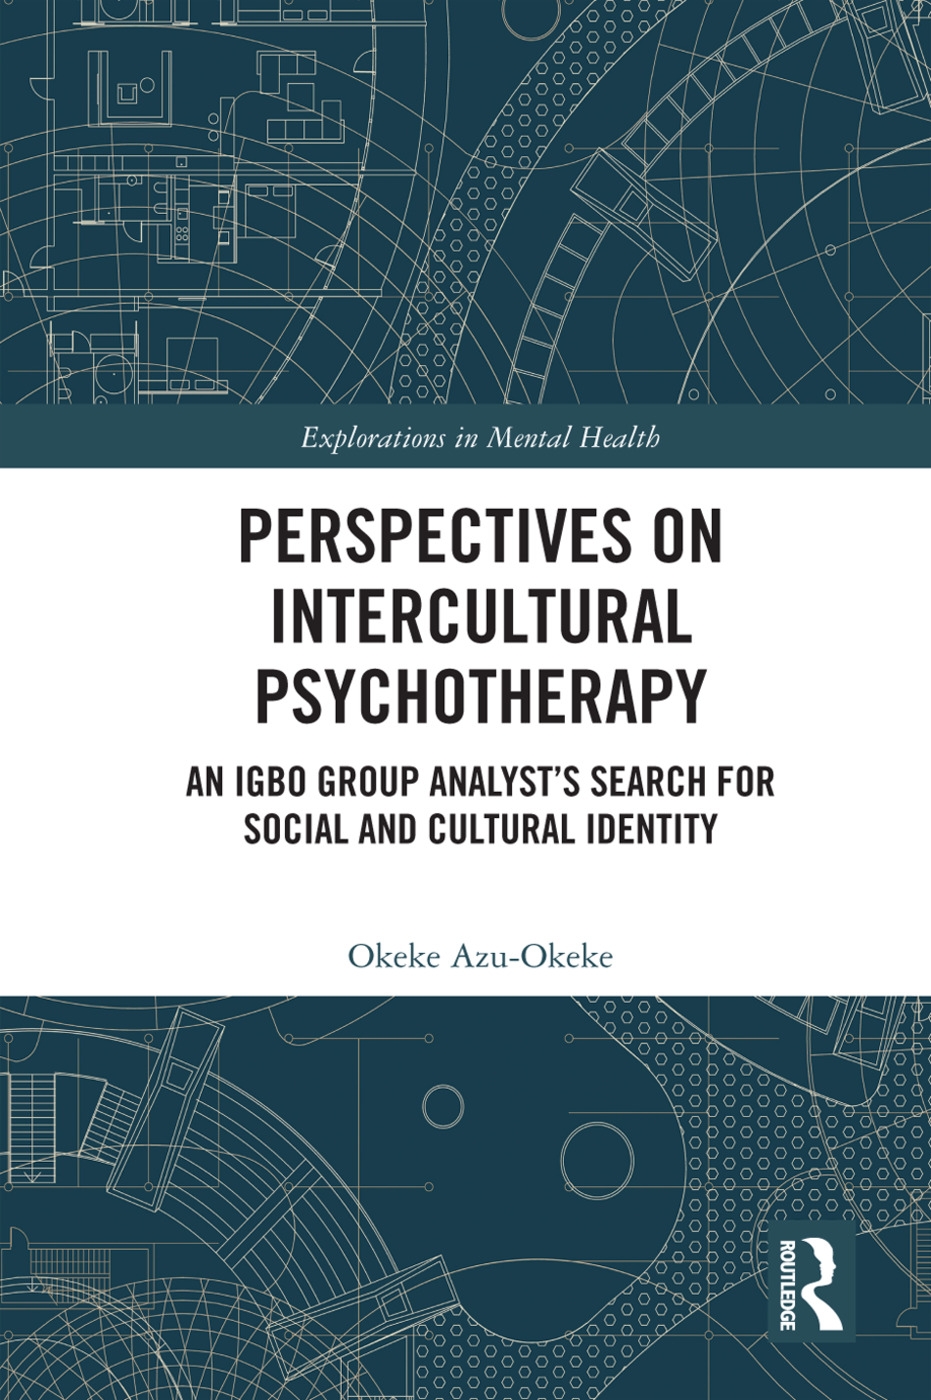 Perspectives on Intercultural Psychotherapy: An Igbo Group Analyst’s Search for Social and Cultural Identity